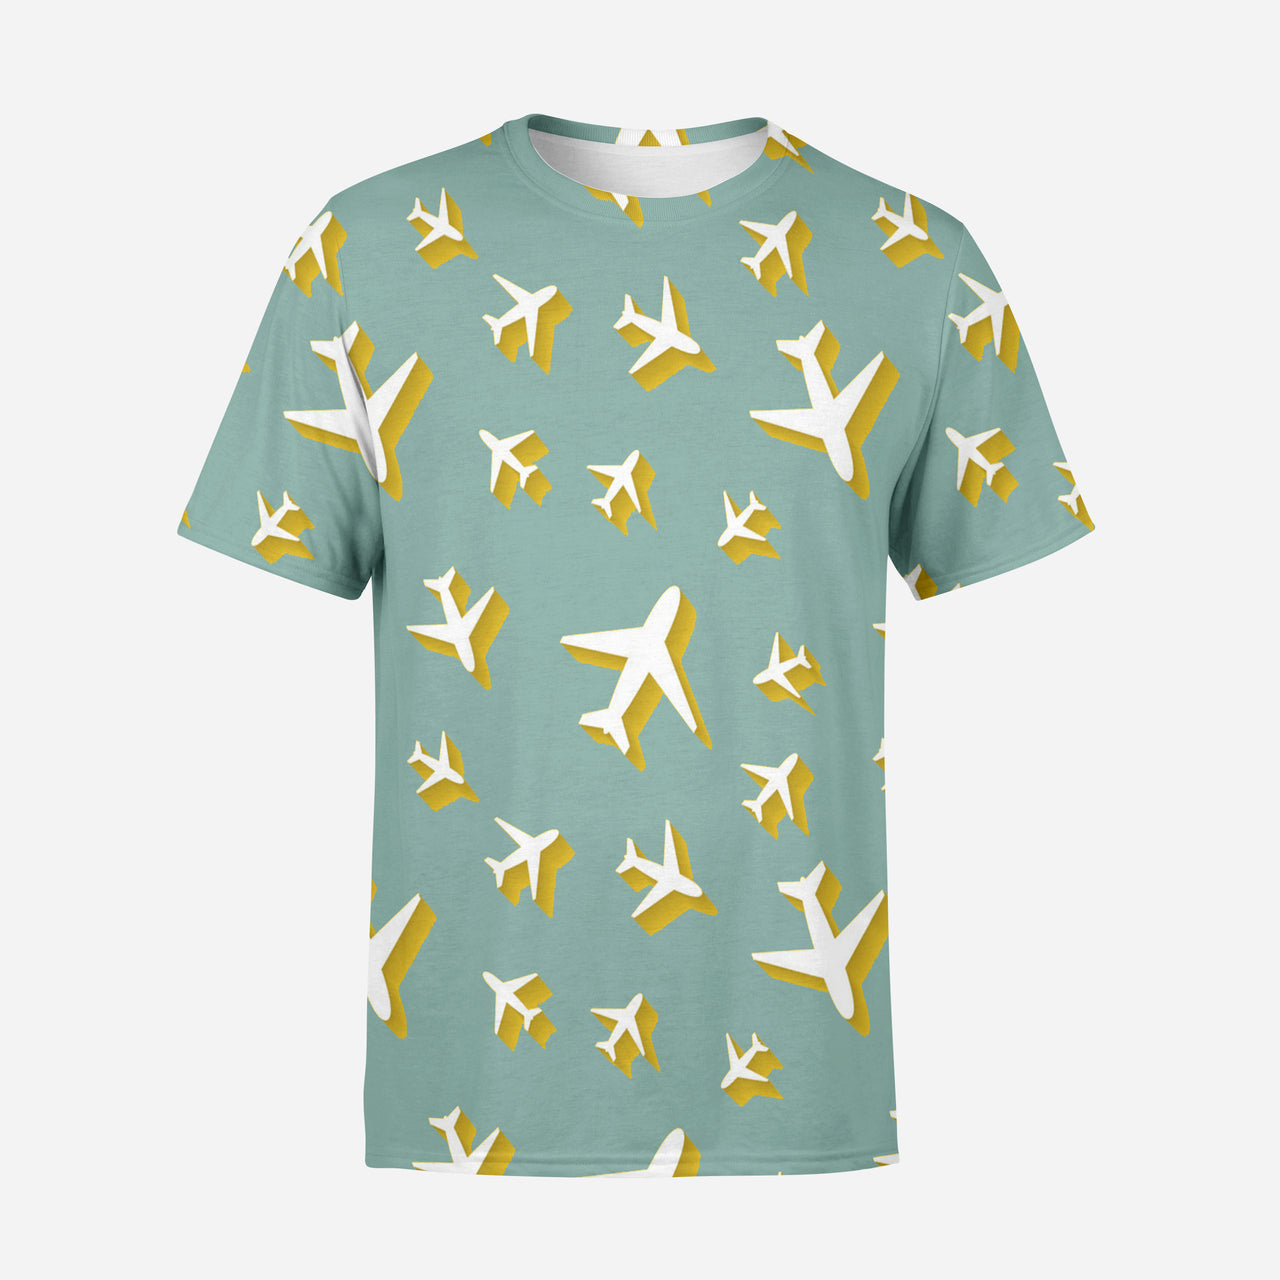 Mixed Size Airplanes Designed 3D T-Shirts